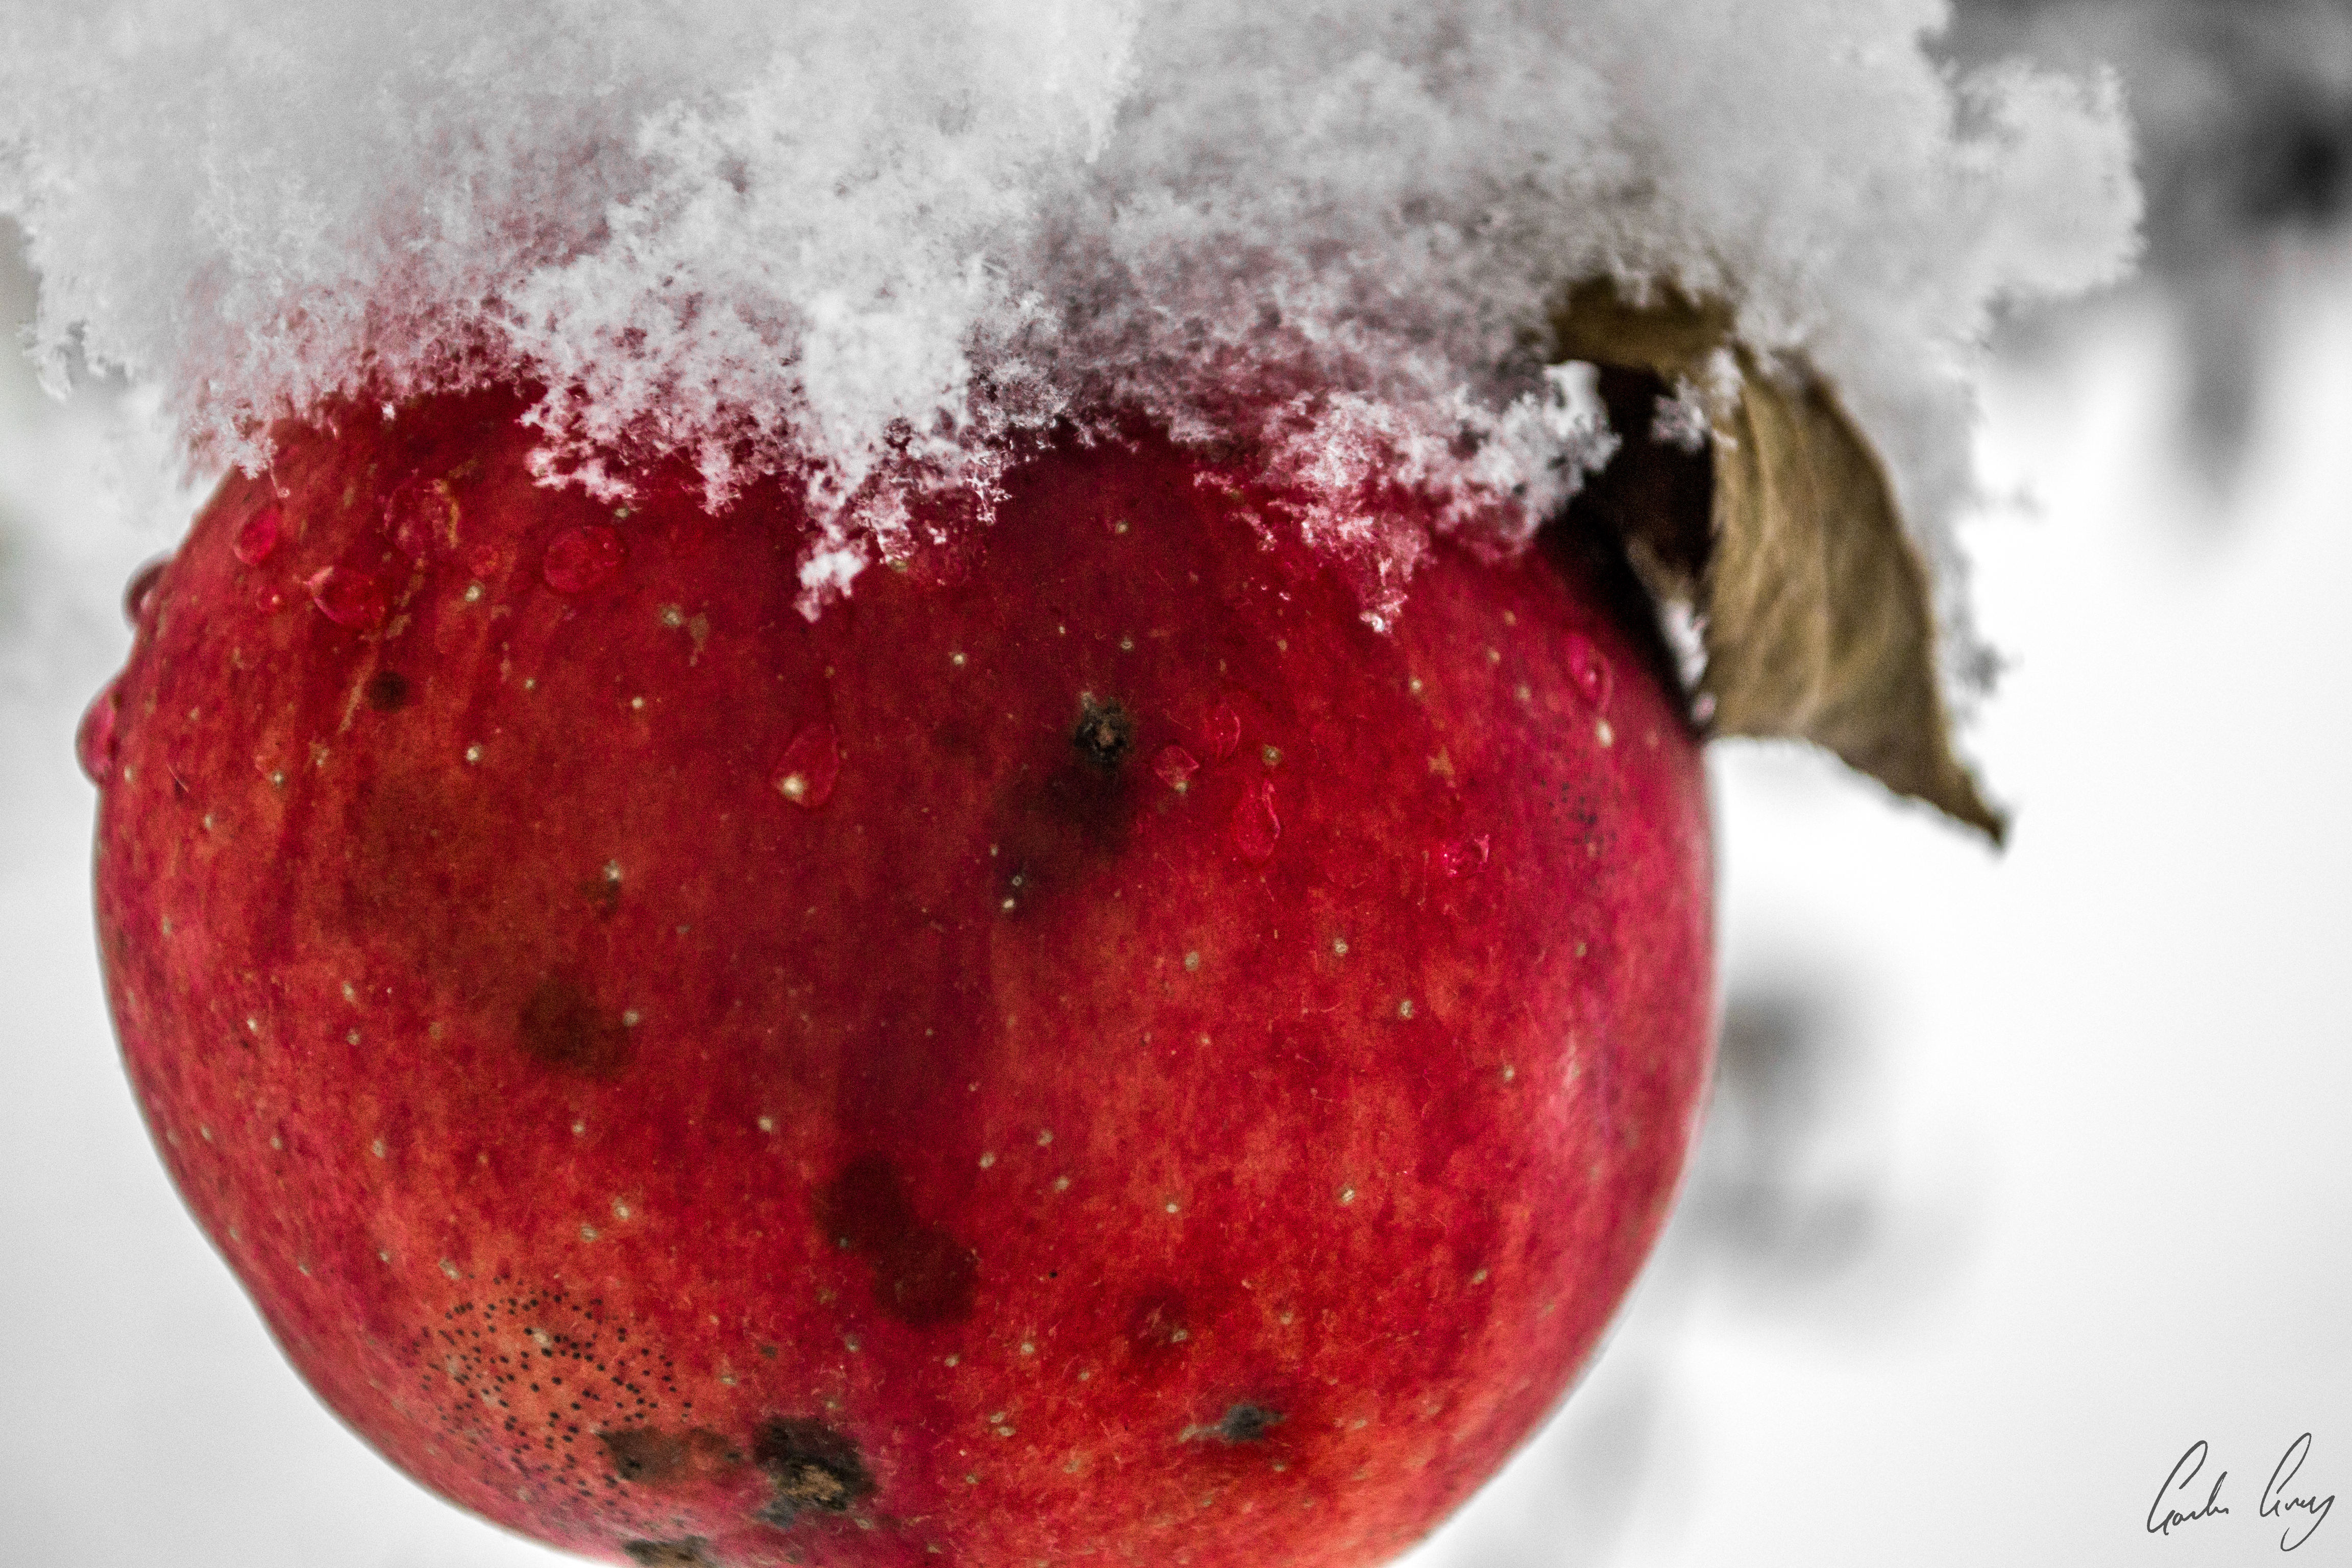 Wallpaper, food, red, snow, winter, closeup, fruit, ice, cold, bright, color, tree, apple, autumn, season, snowy, colour, colourful, frosty, produce, close up, macro photography, still life photography, cranberry, flavour, pomegranate juice